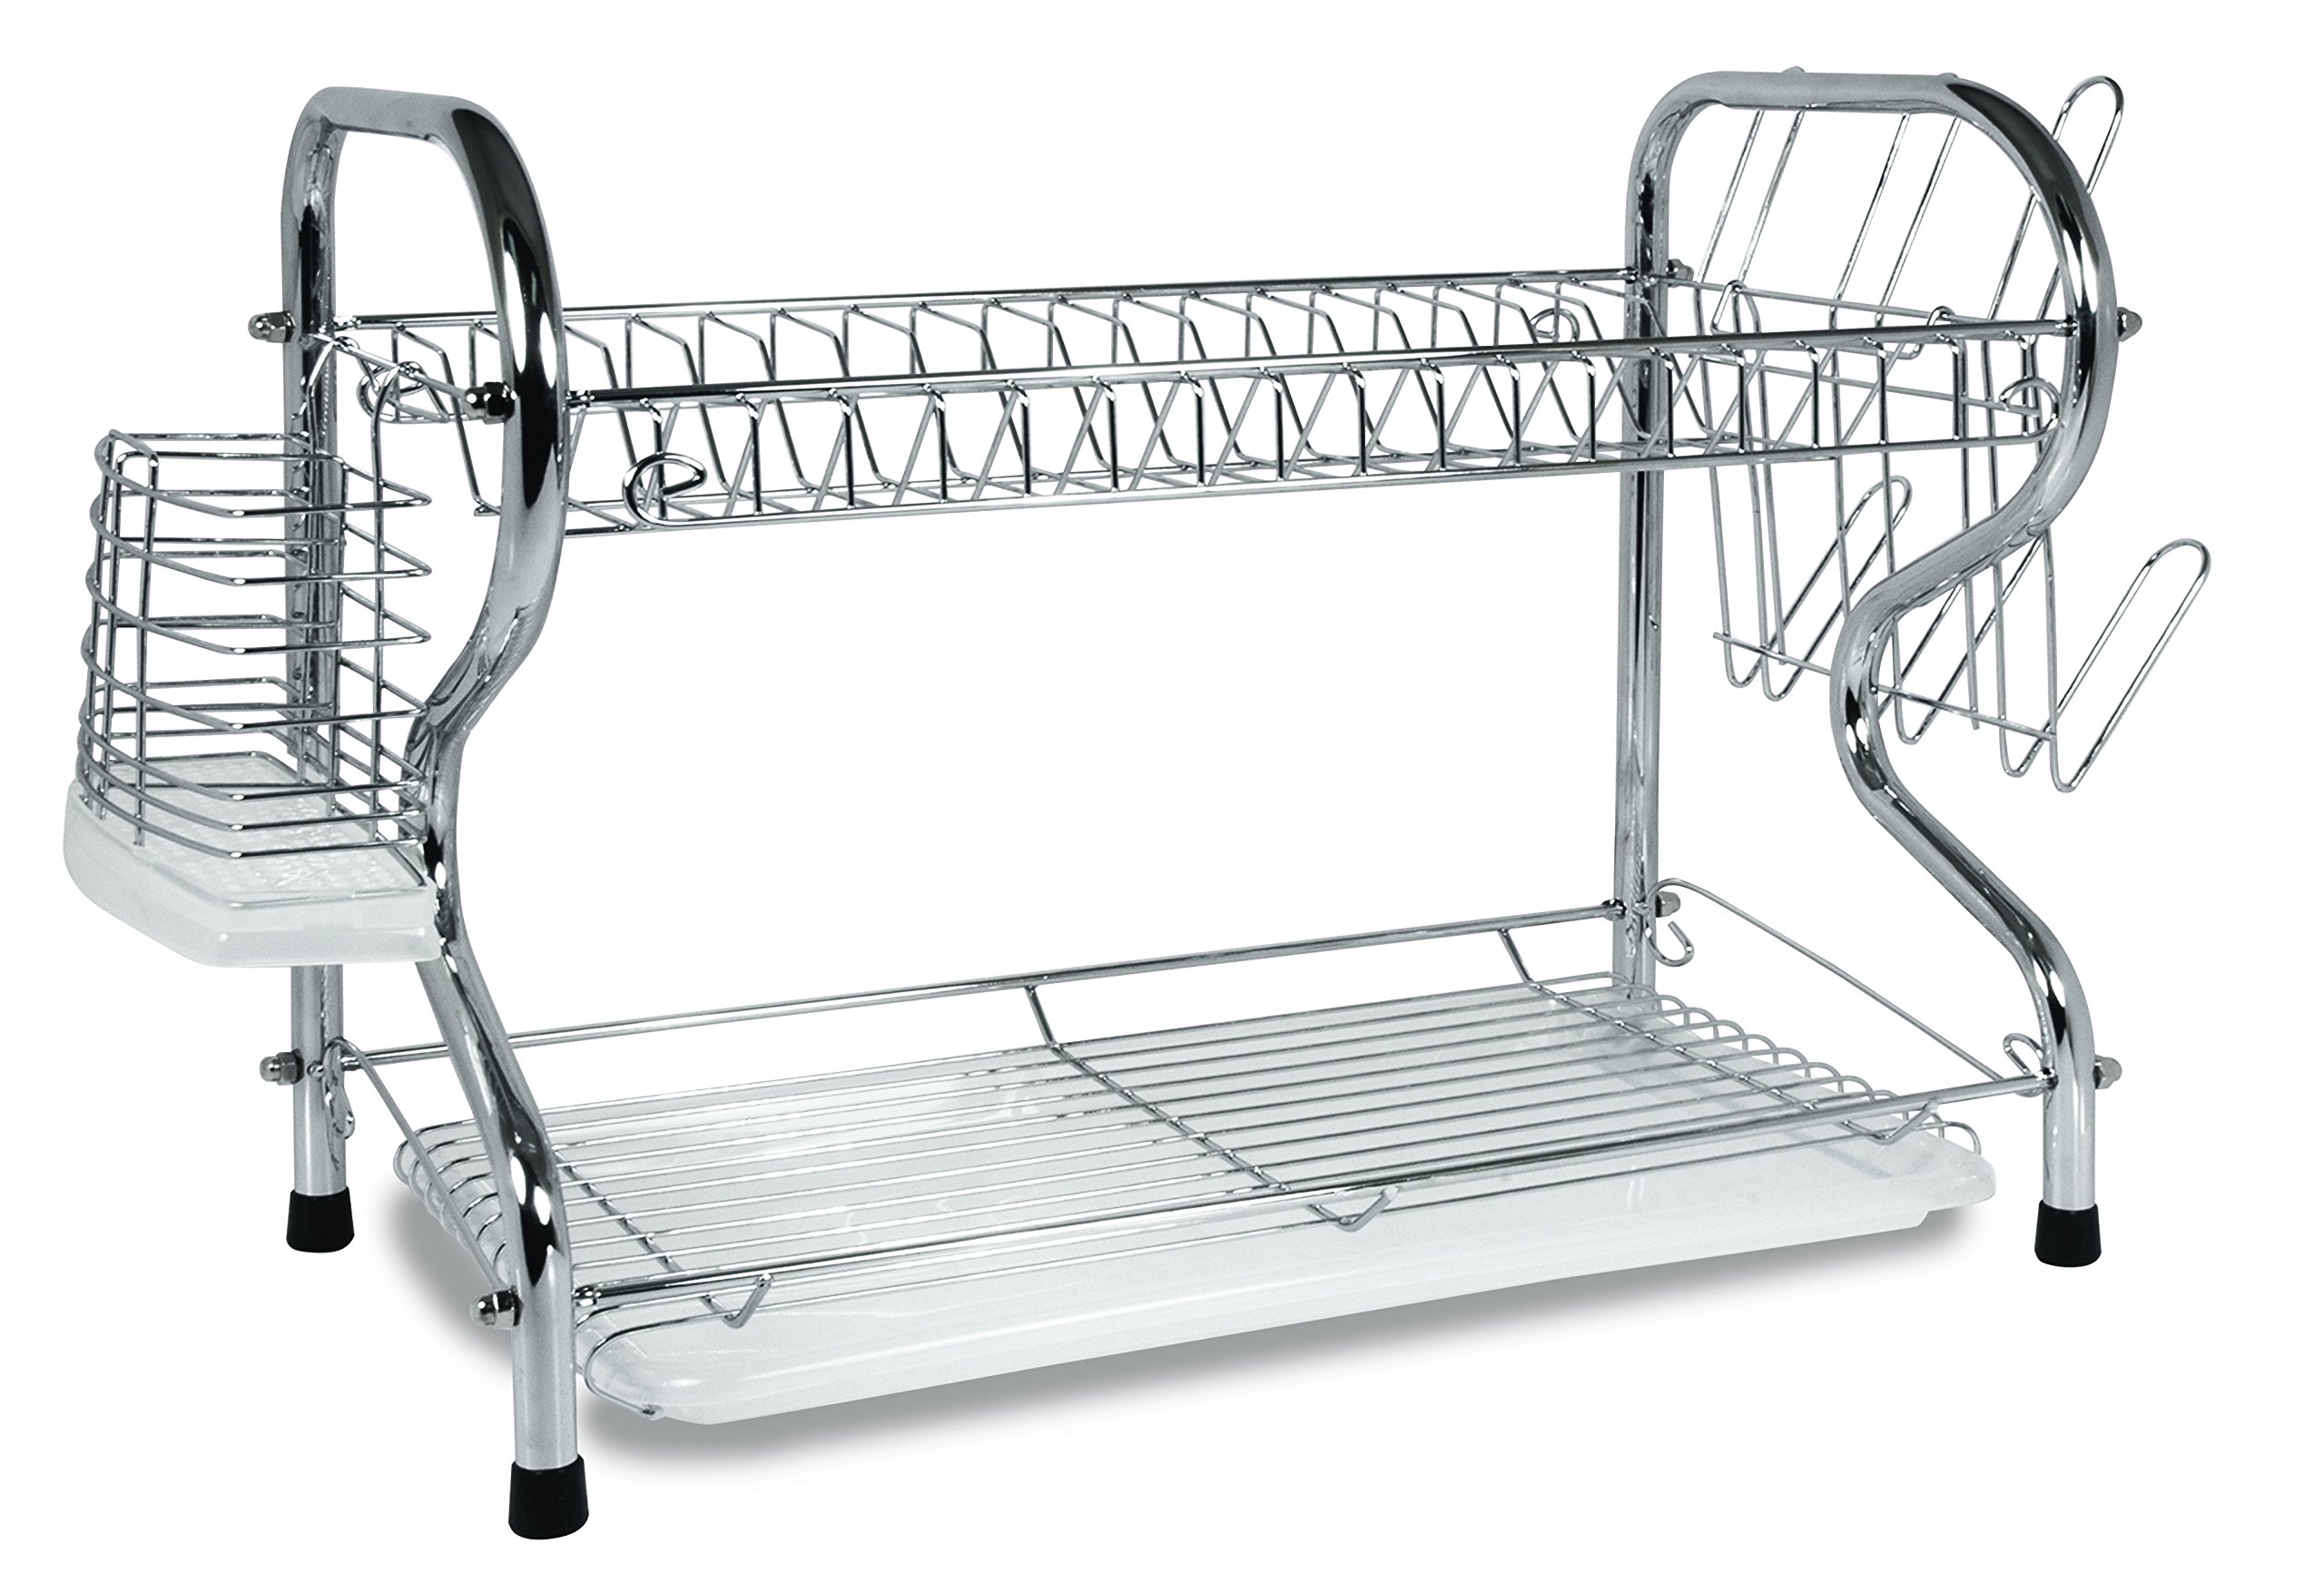 16" Better Chef 2-Tier Dishrack $12.76 + Free Shipping w/ Prime or on $35+